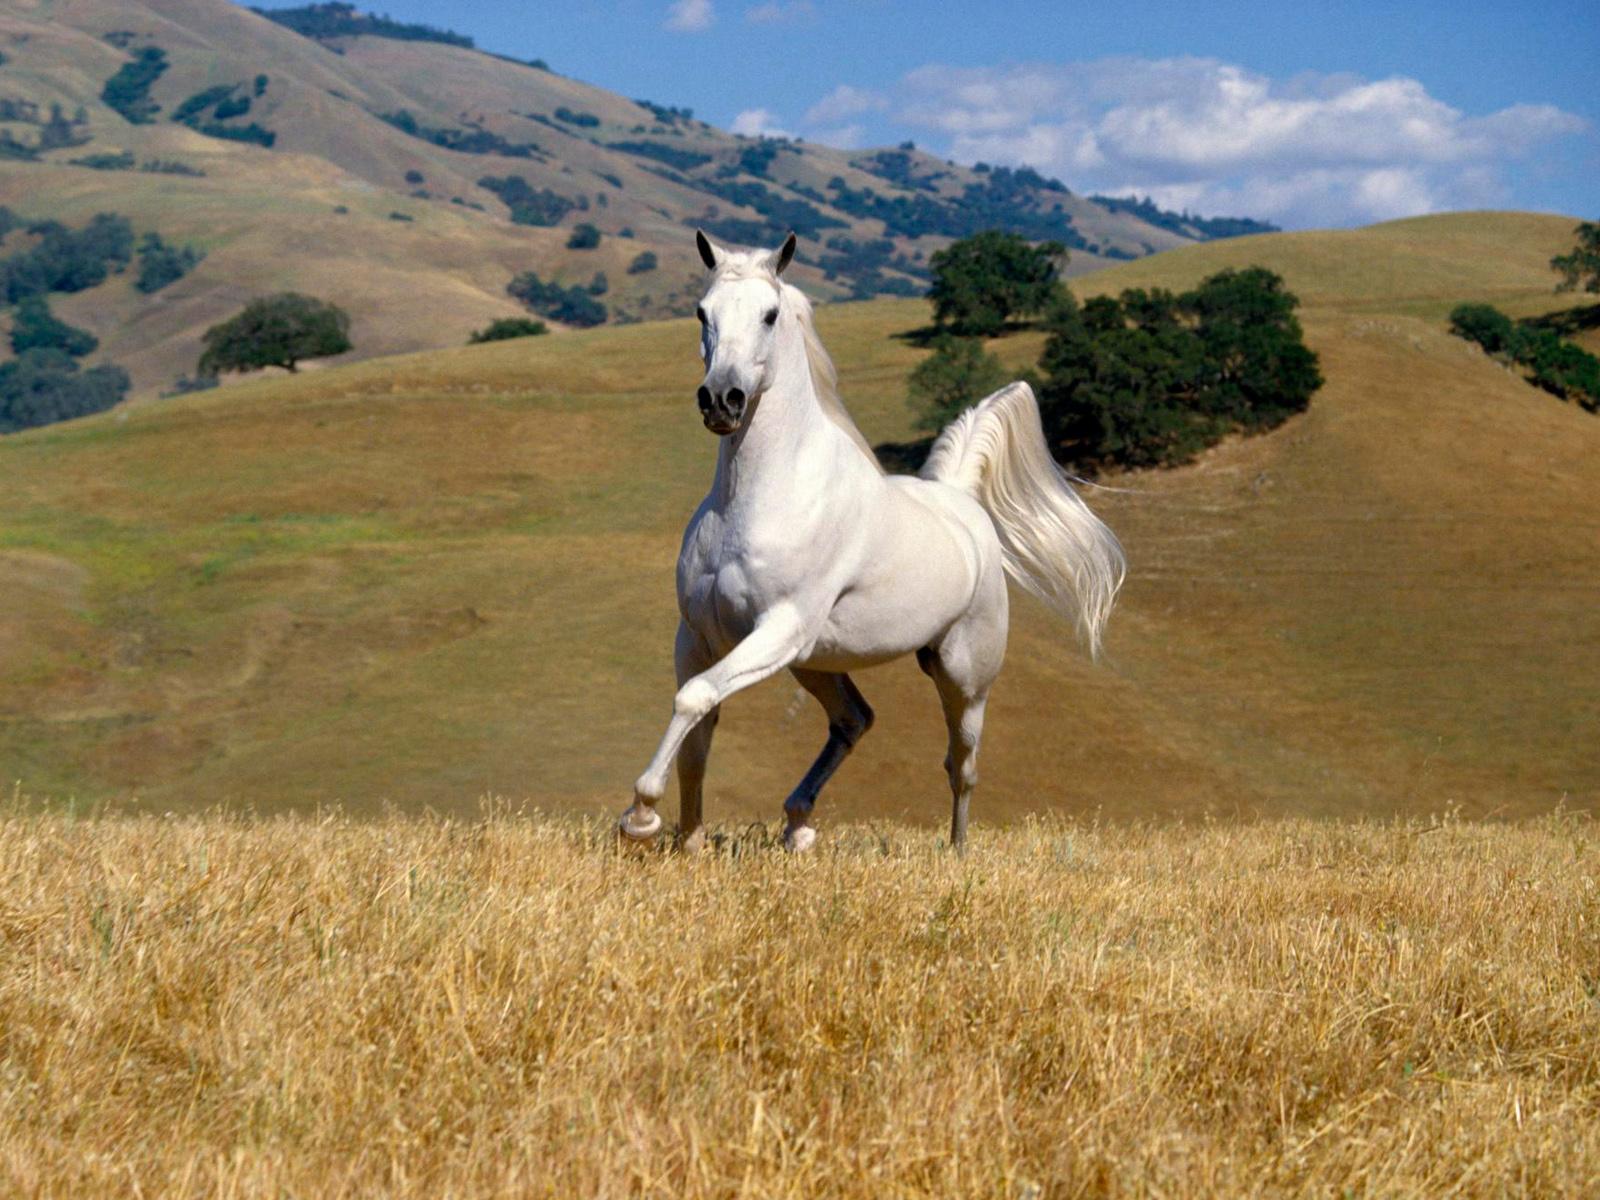 Wallpaper Of A White Horse Galloping In Field